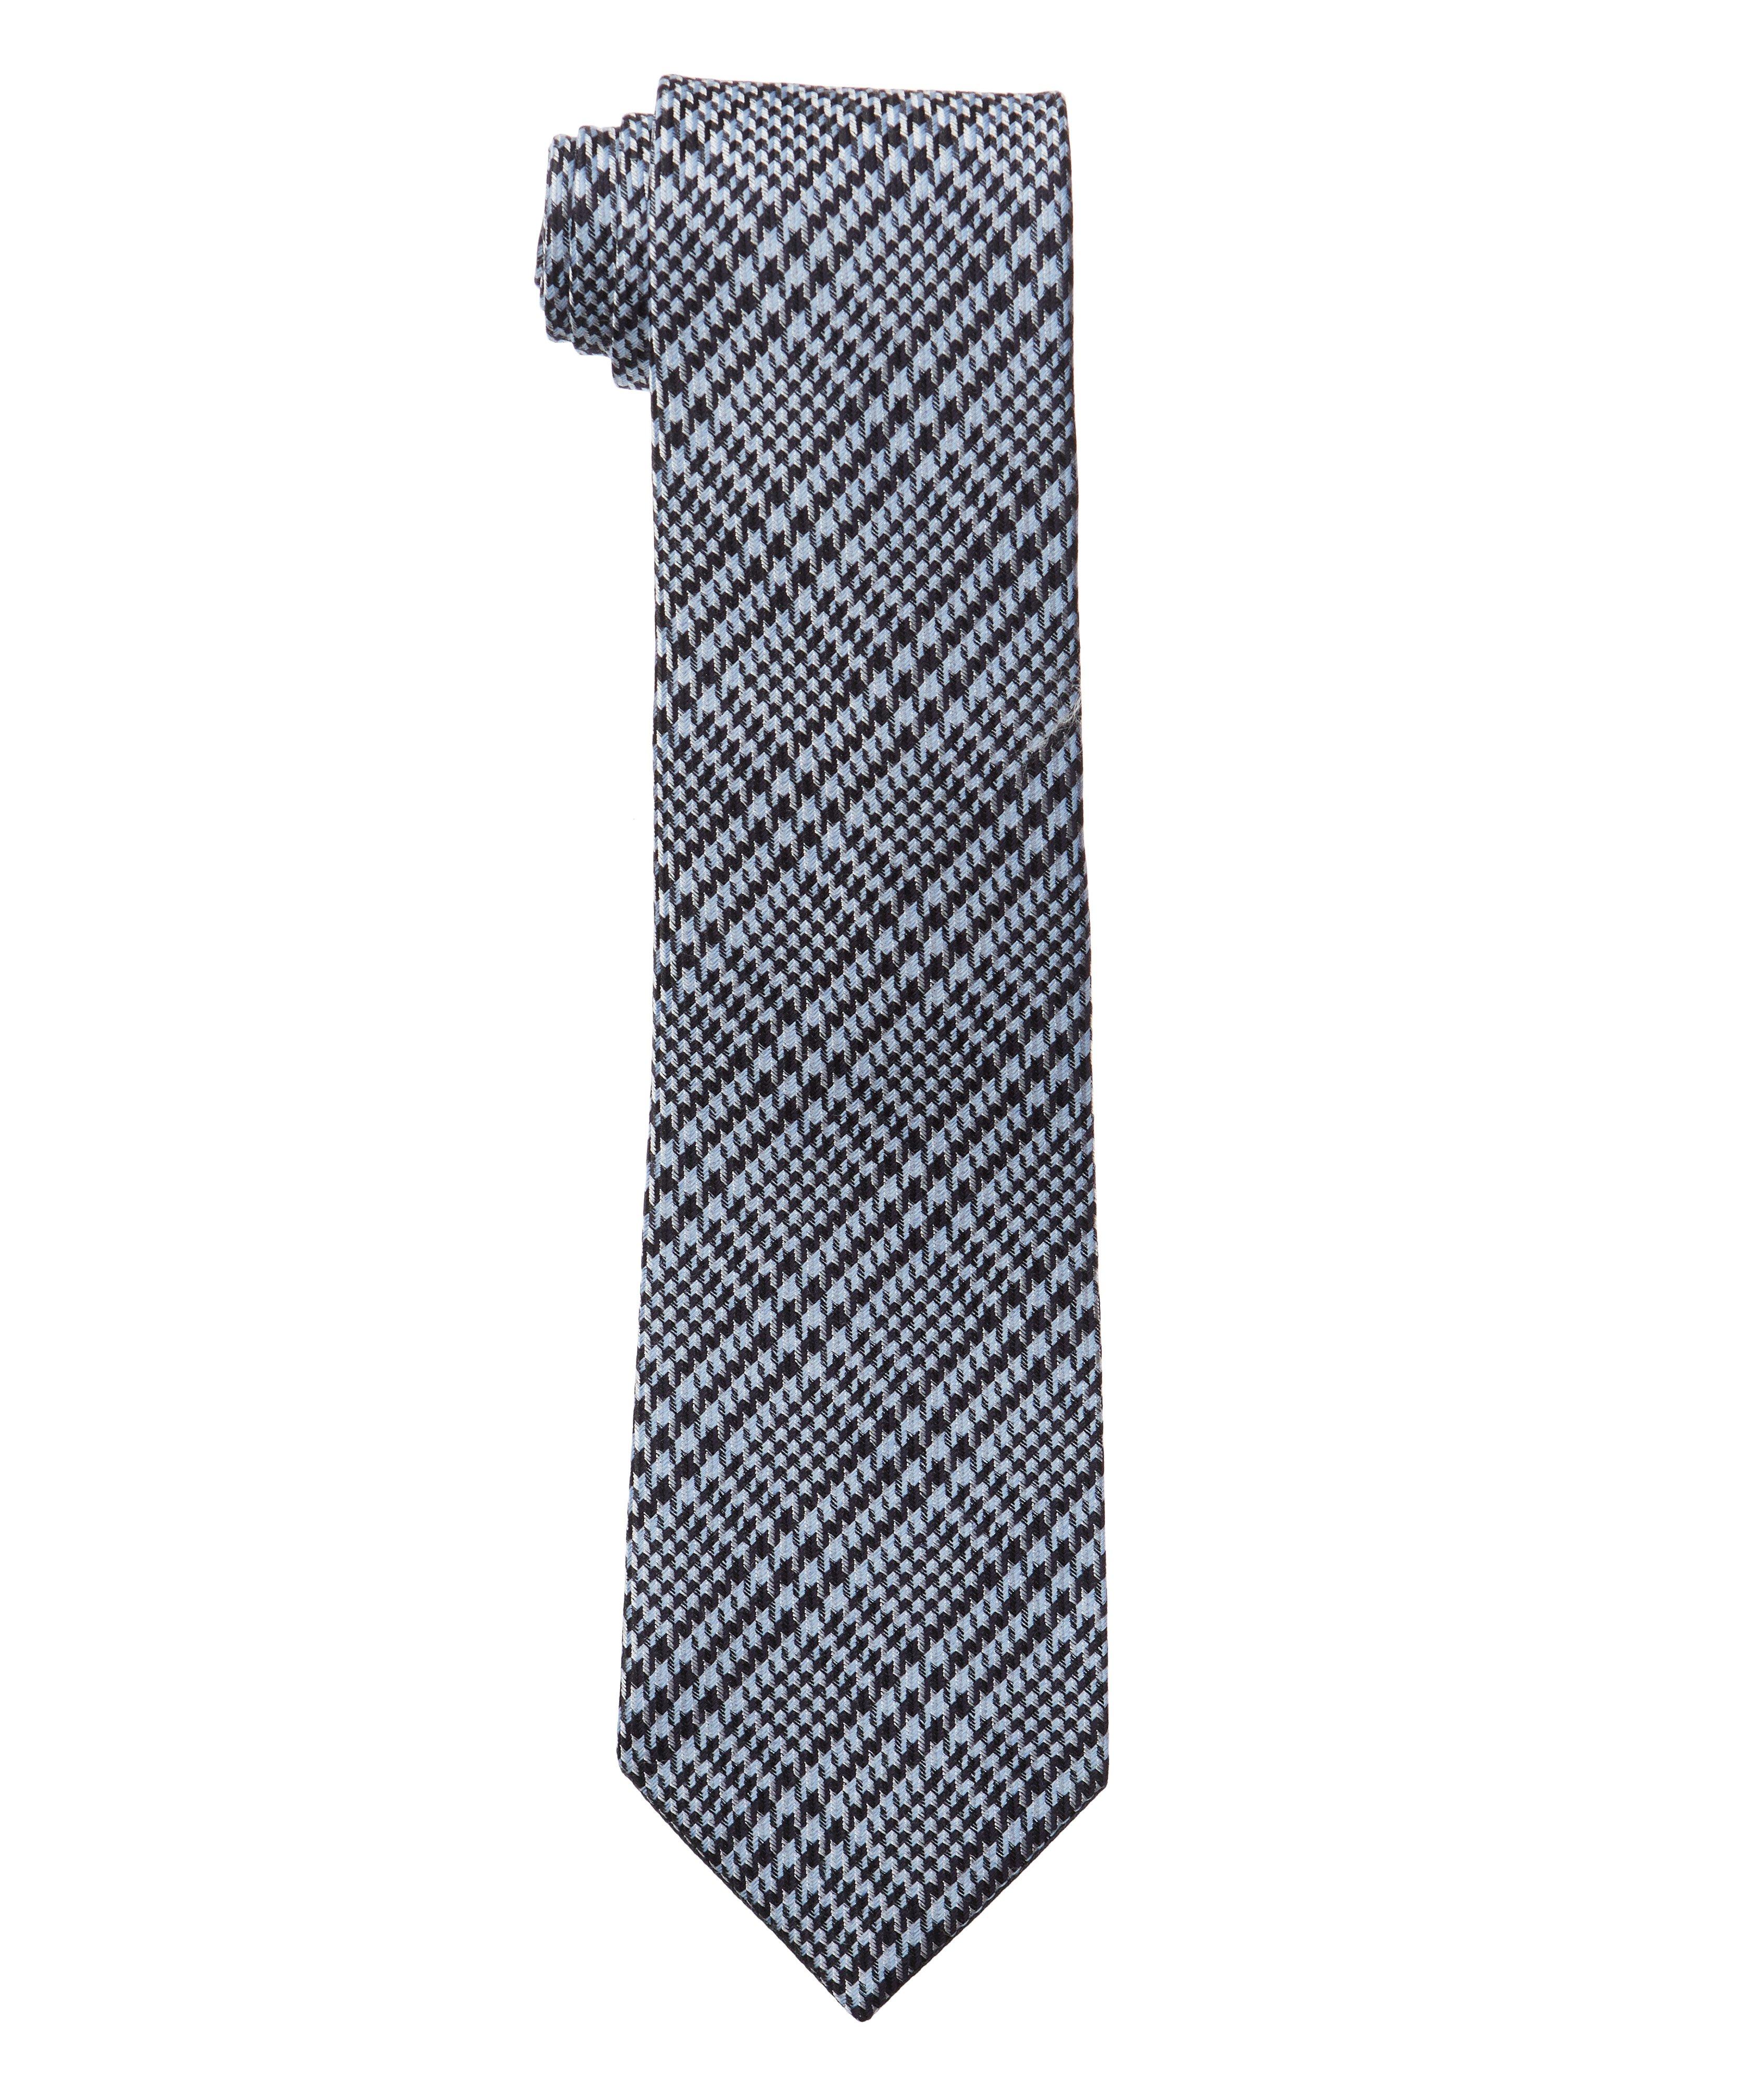 Houndstooth Check Silk-Wool Tie image 0